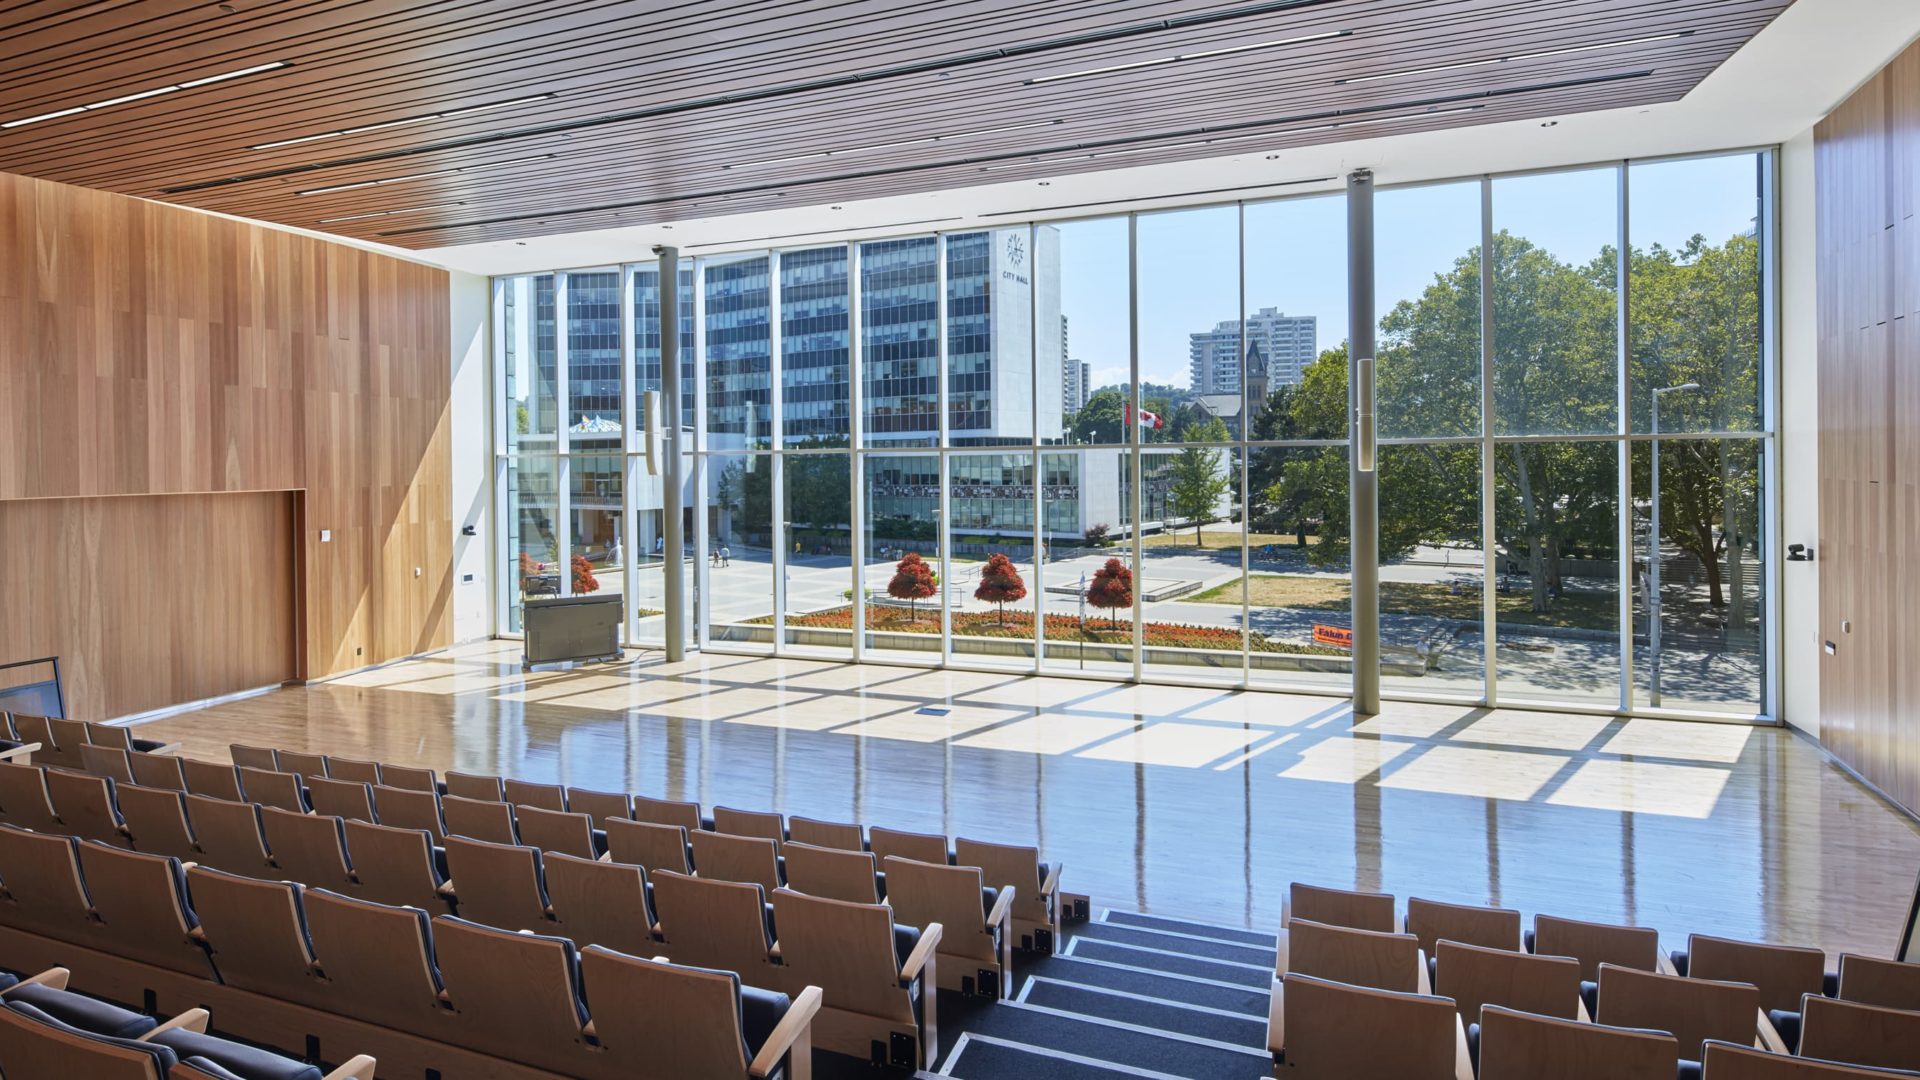 lecture hall in david braley health sciences centre at mcmaster university